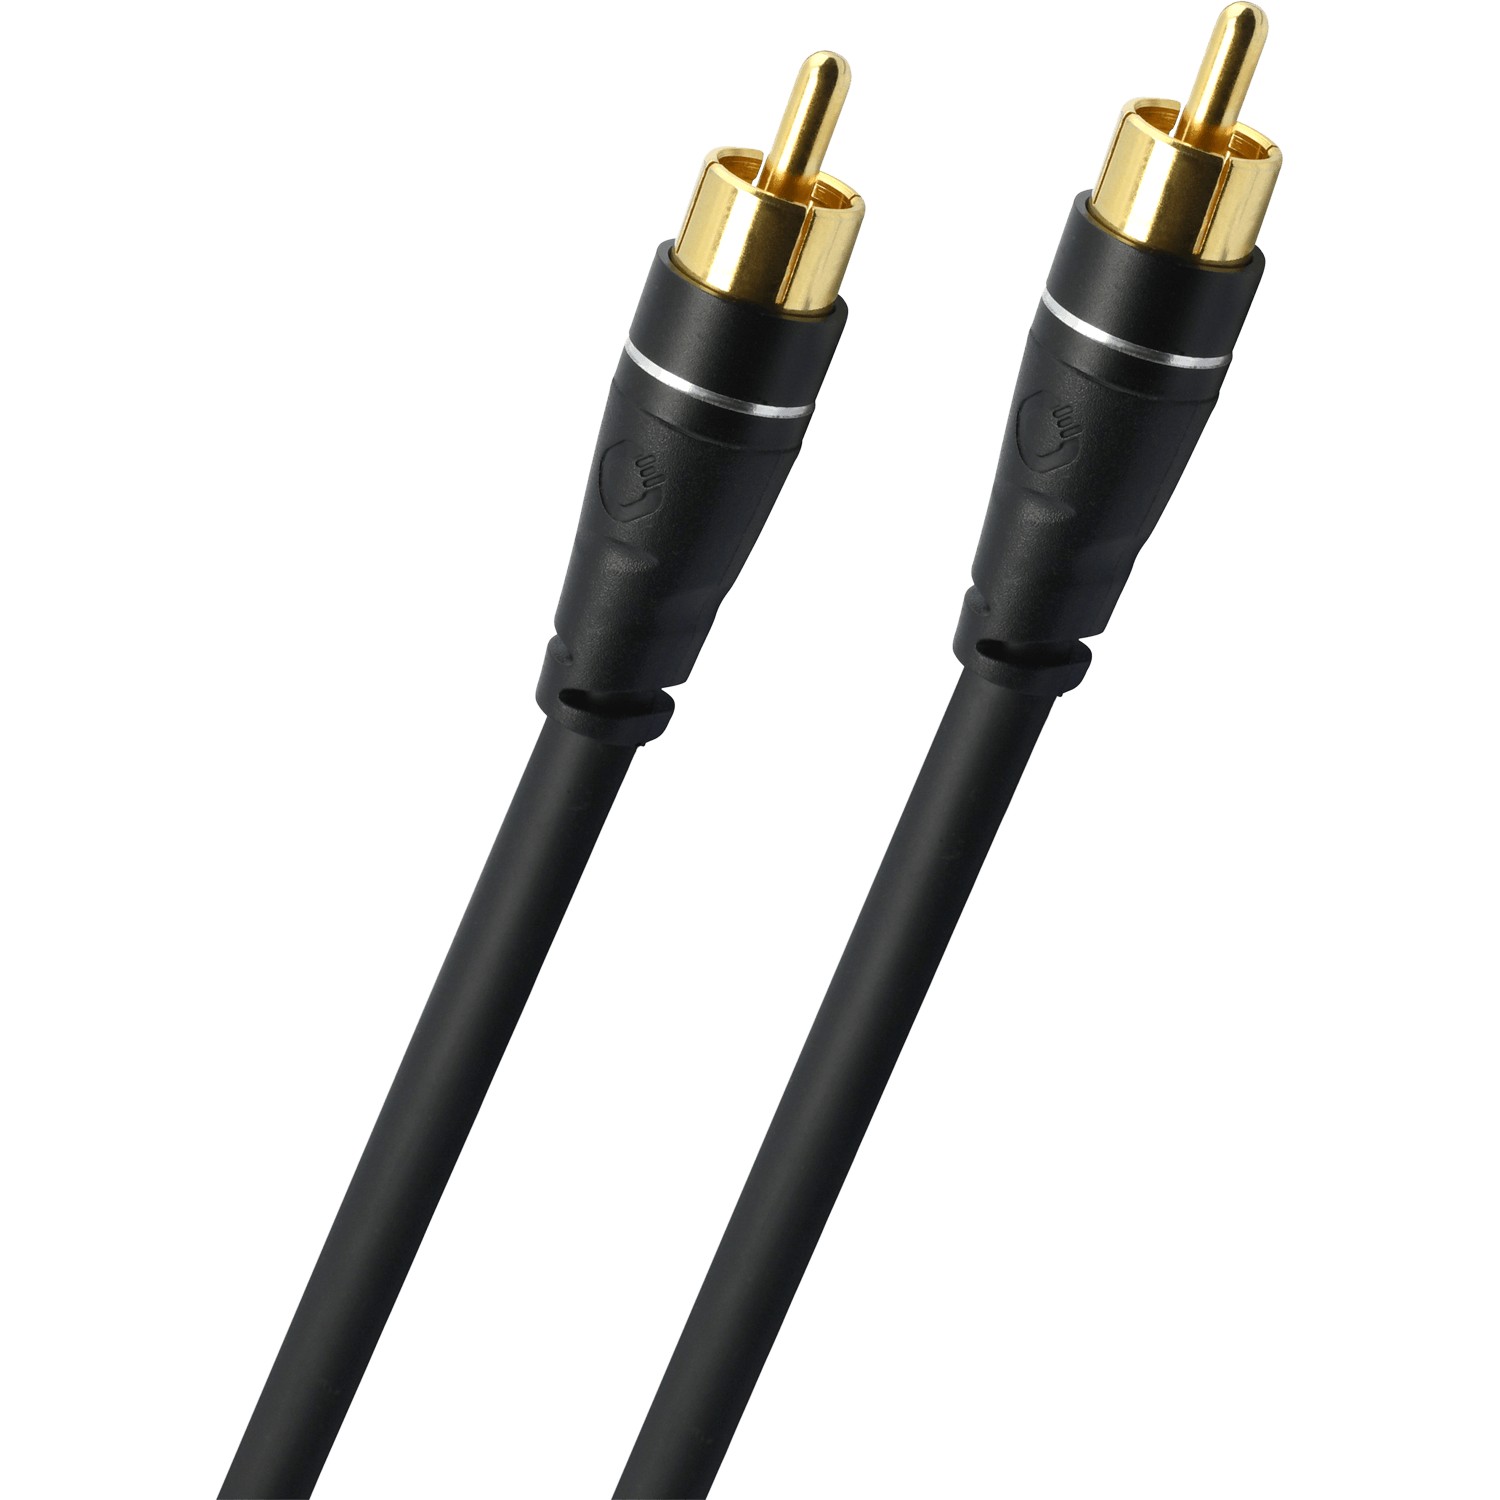 Кабели межблочные аудио Oehlbach EXCELLENCE Sub Link Subwoofer cable 5,0m bw, D1C33162 кабели межблочные аудио oehlbach booom y adapter cable anthracite 10 0 m 23710